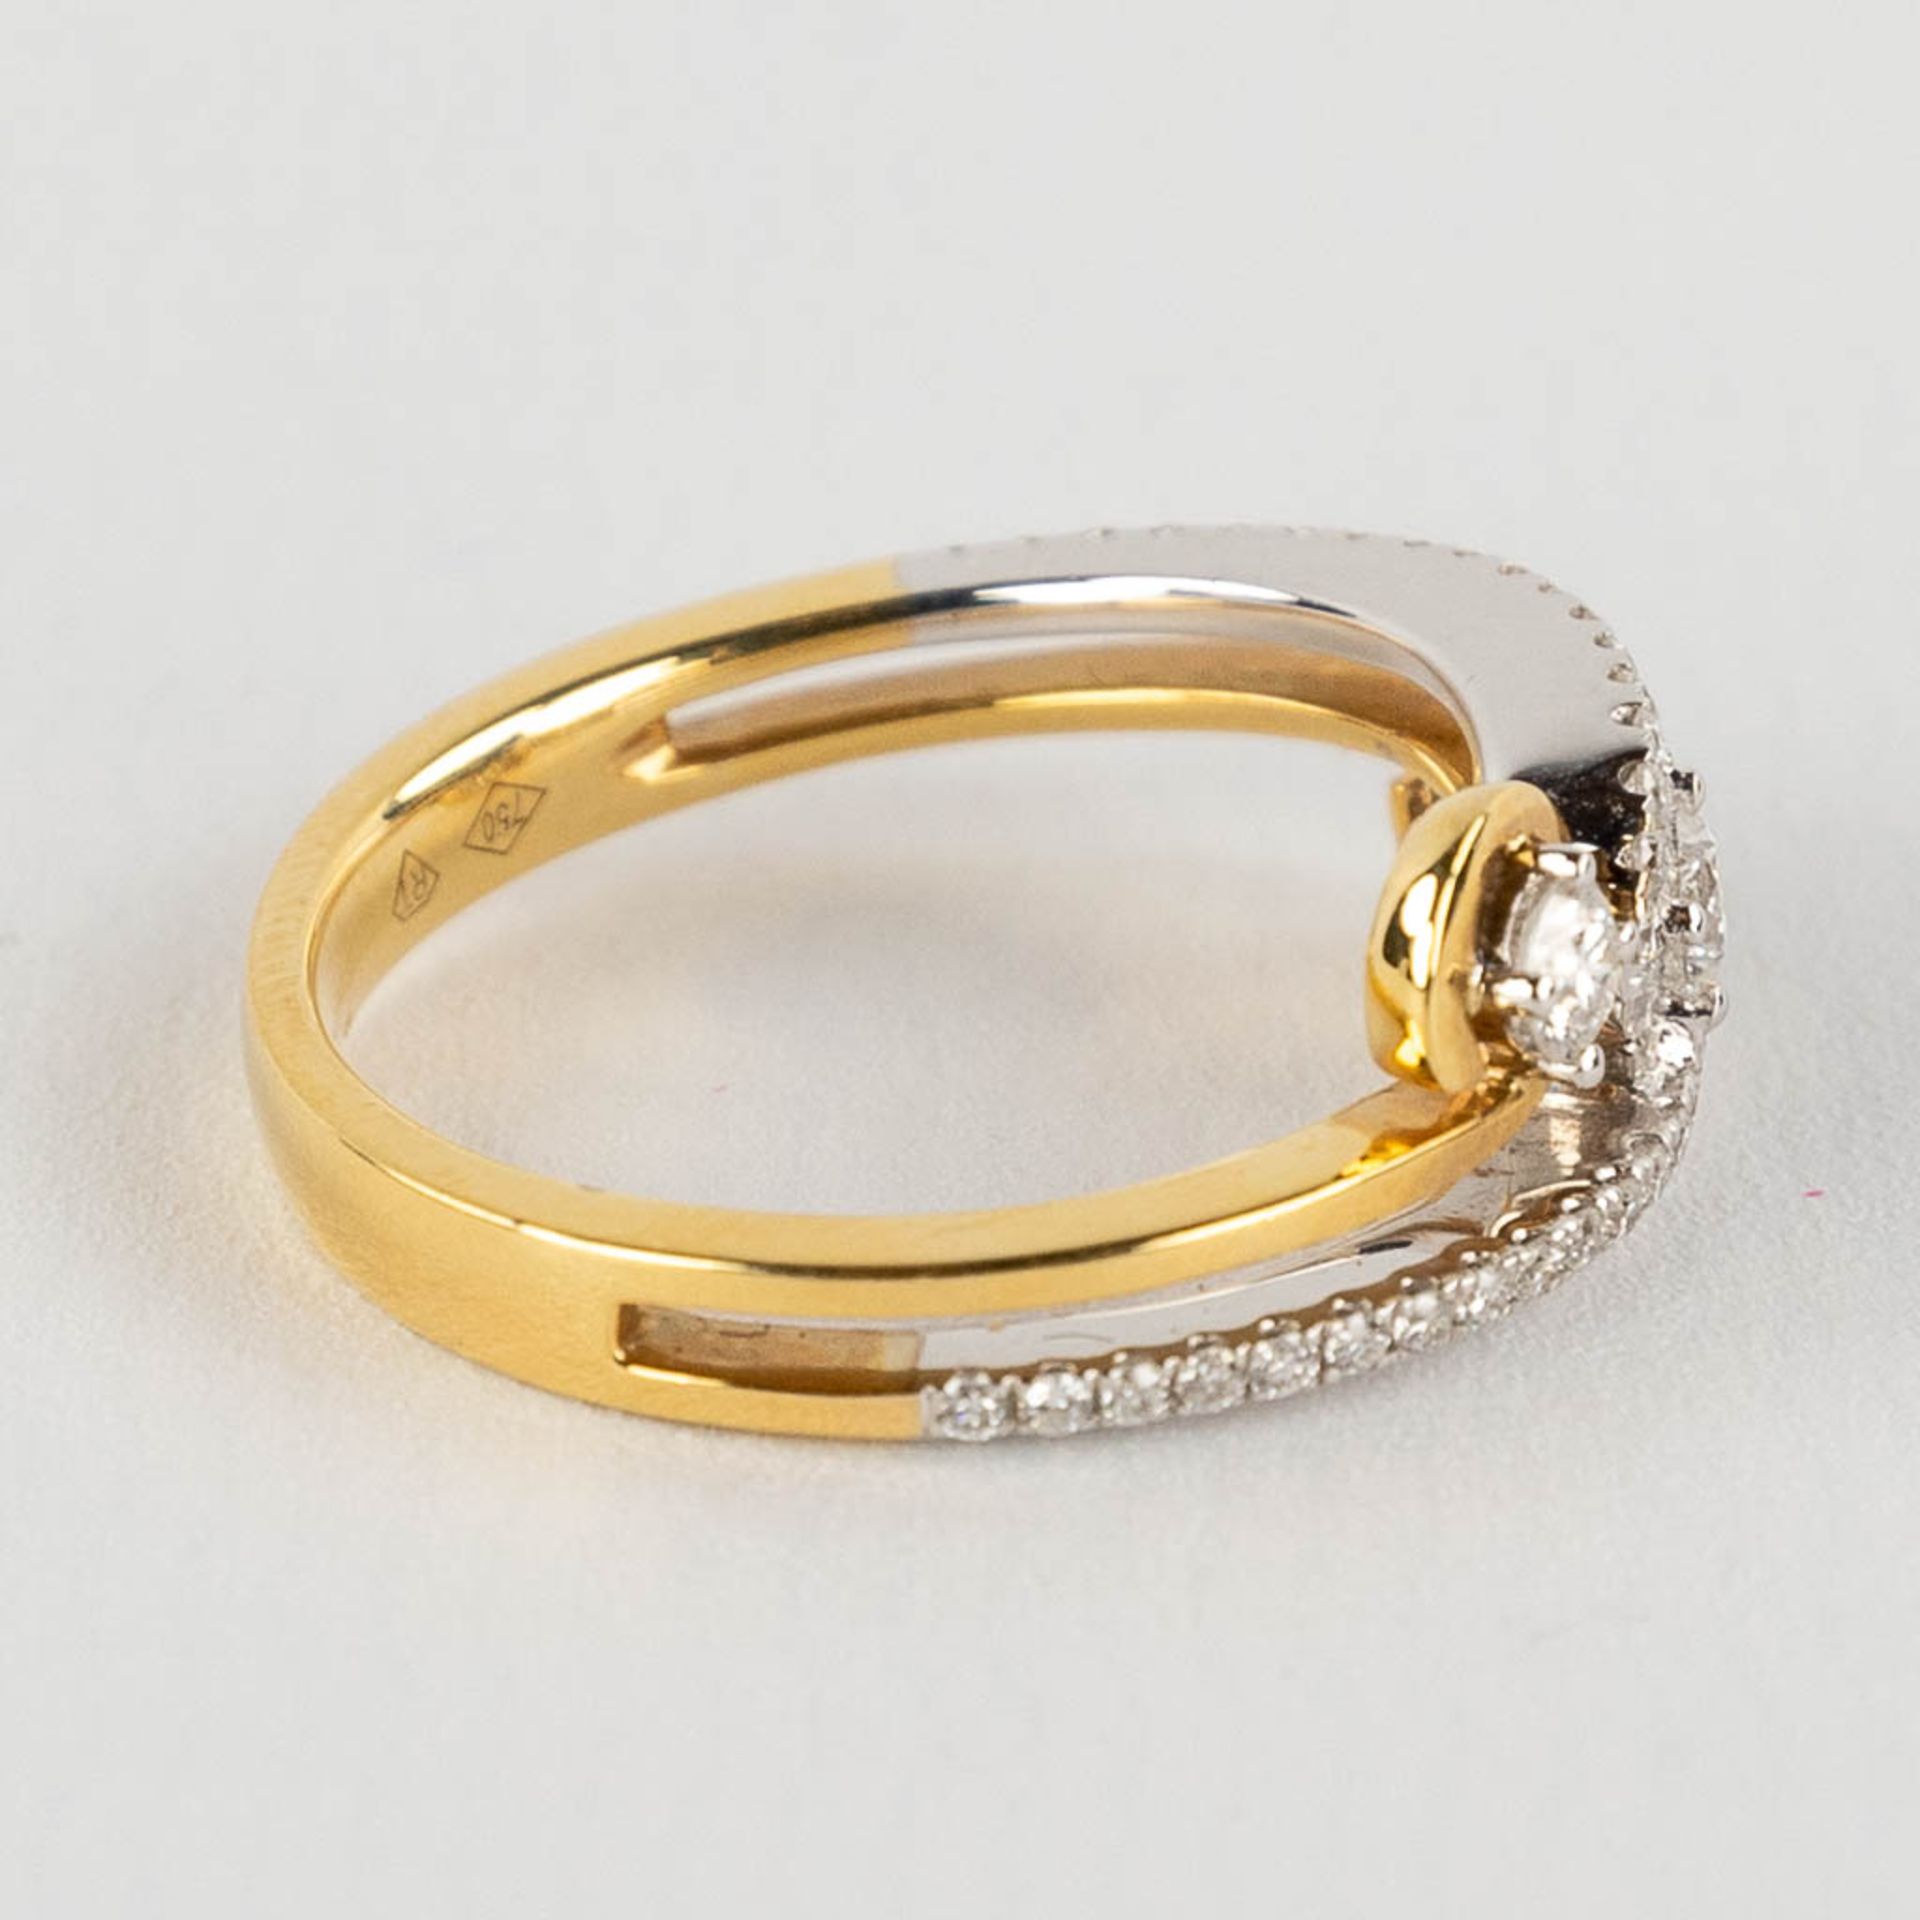 A ring, 18kt yellow and white gold with diamonds, appr. 0,48ct. Ring size 54. - Image 7 of 11